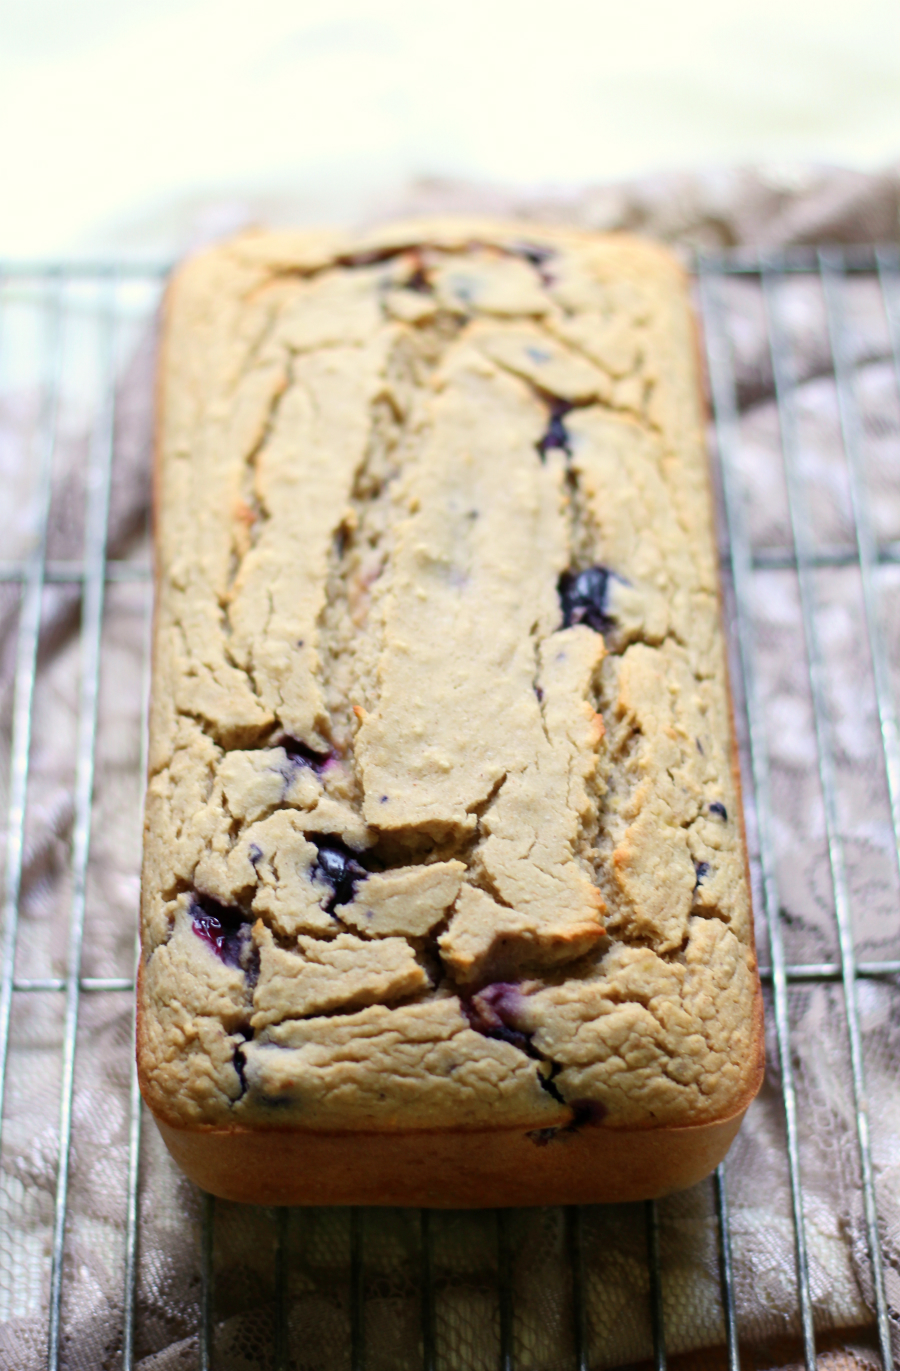 Blueberry Yogurt Banana Bread | Strength and Sunshine @RebeccaGF666 A healthy, moist, delicious, sweet quick bread! This Blueberry Yogurt Banana Bread recipe is gluten-free and vegan, packed with plump blueberries, coconut yogurt, and banana! Perfect for breakfast, brunch, as a snack, or dessert!